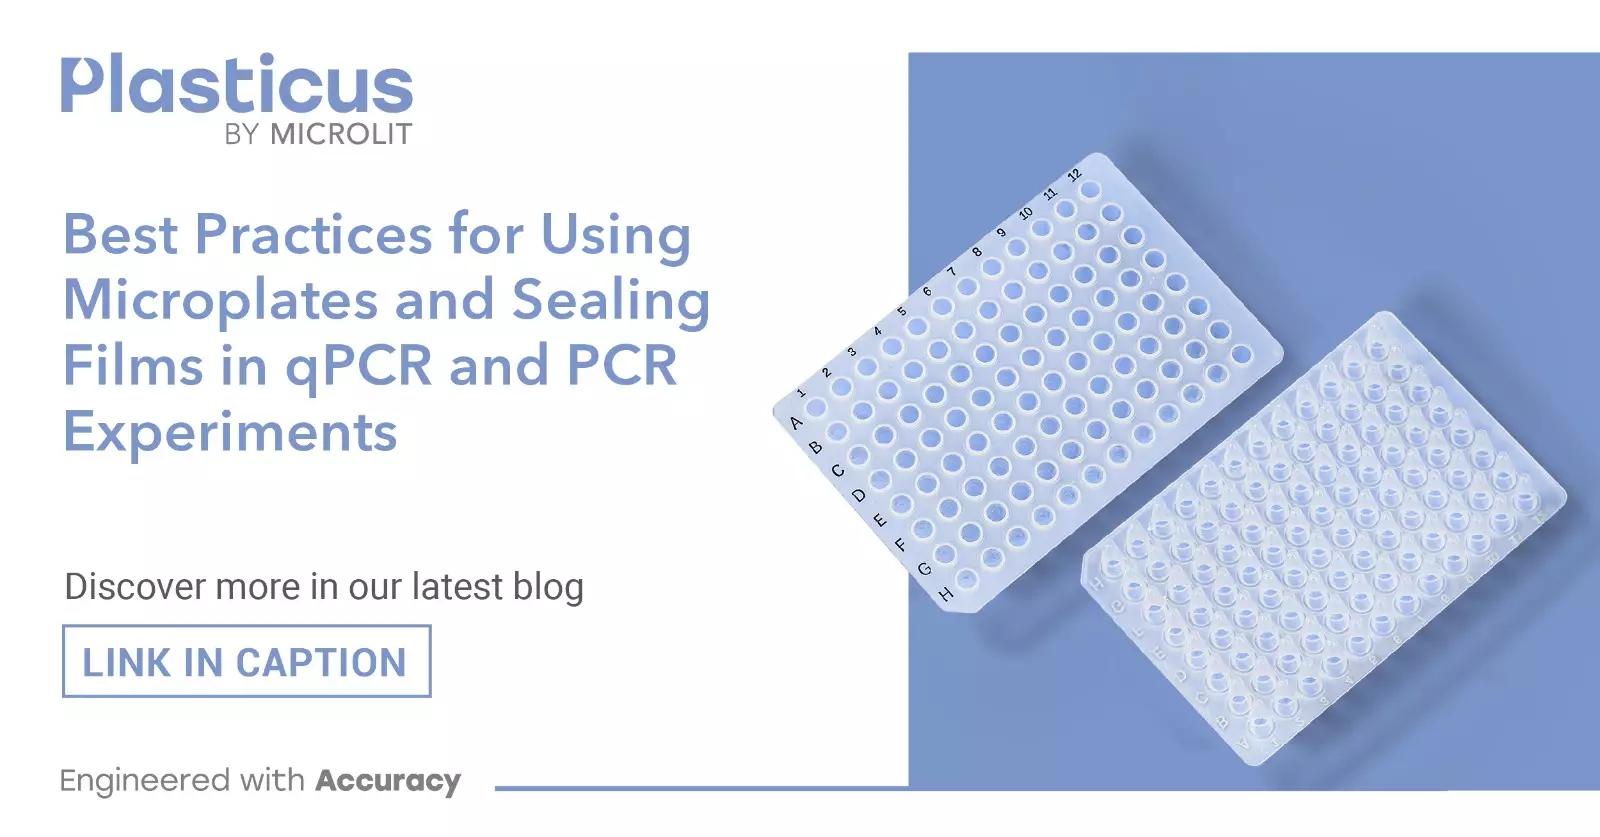 Best Practices for Using Microplates and Sealing Films in qPCR and PCR Experiments